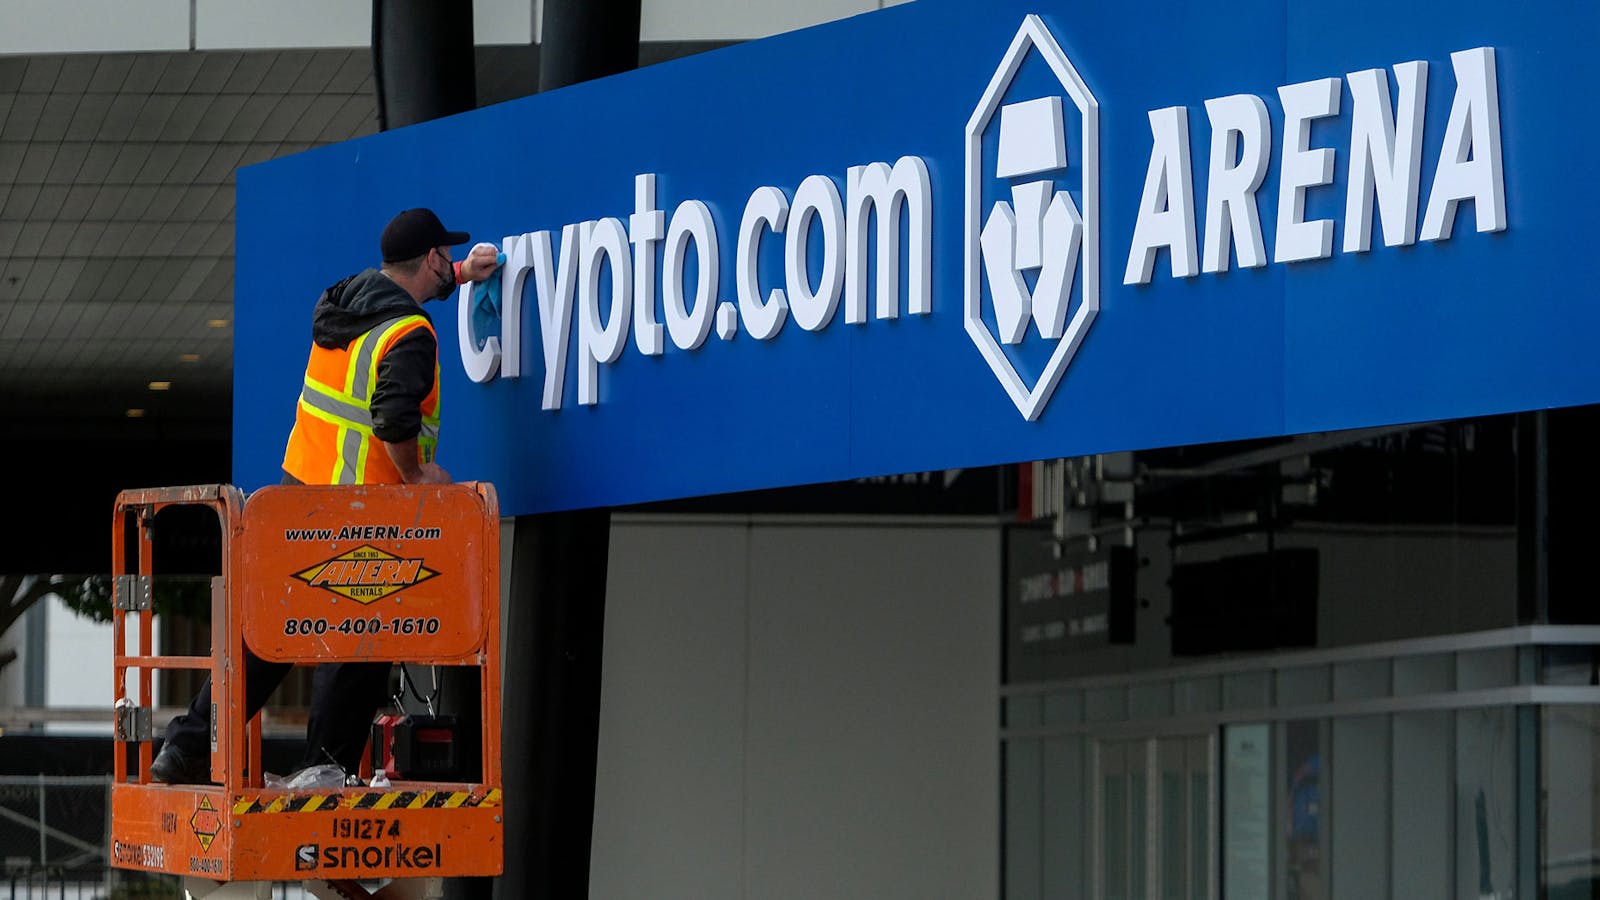 The new Crypto.com Arena sign at the former Staples Center on December 22, 2021 in Los Angeles. Photo by Shutterstock.